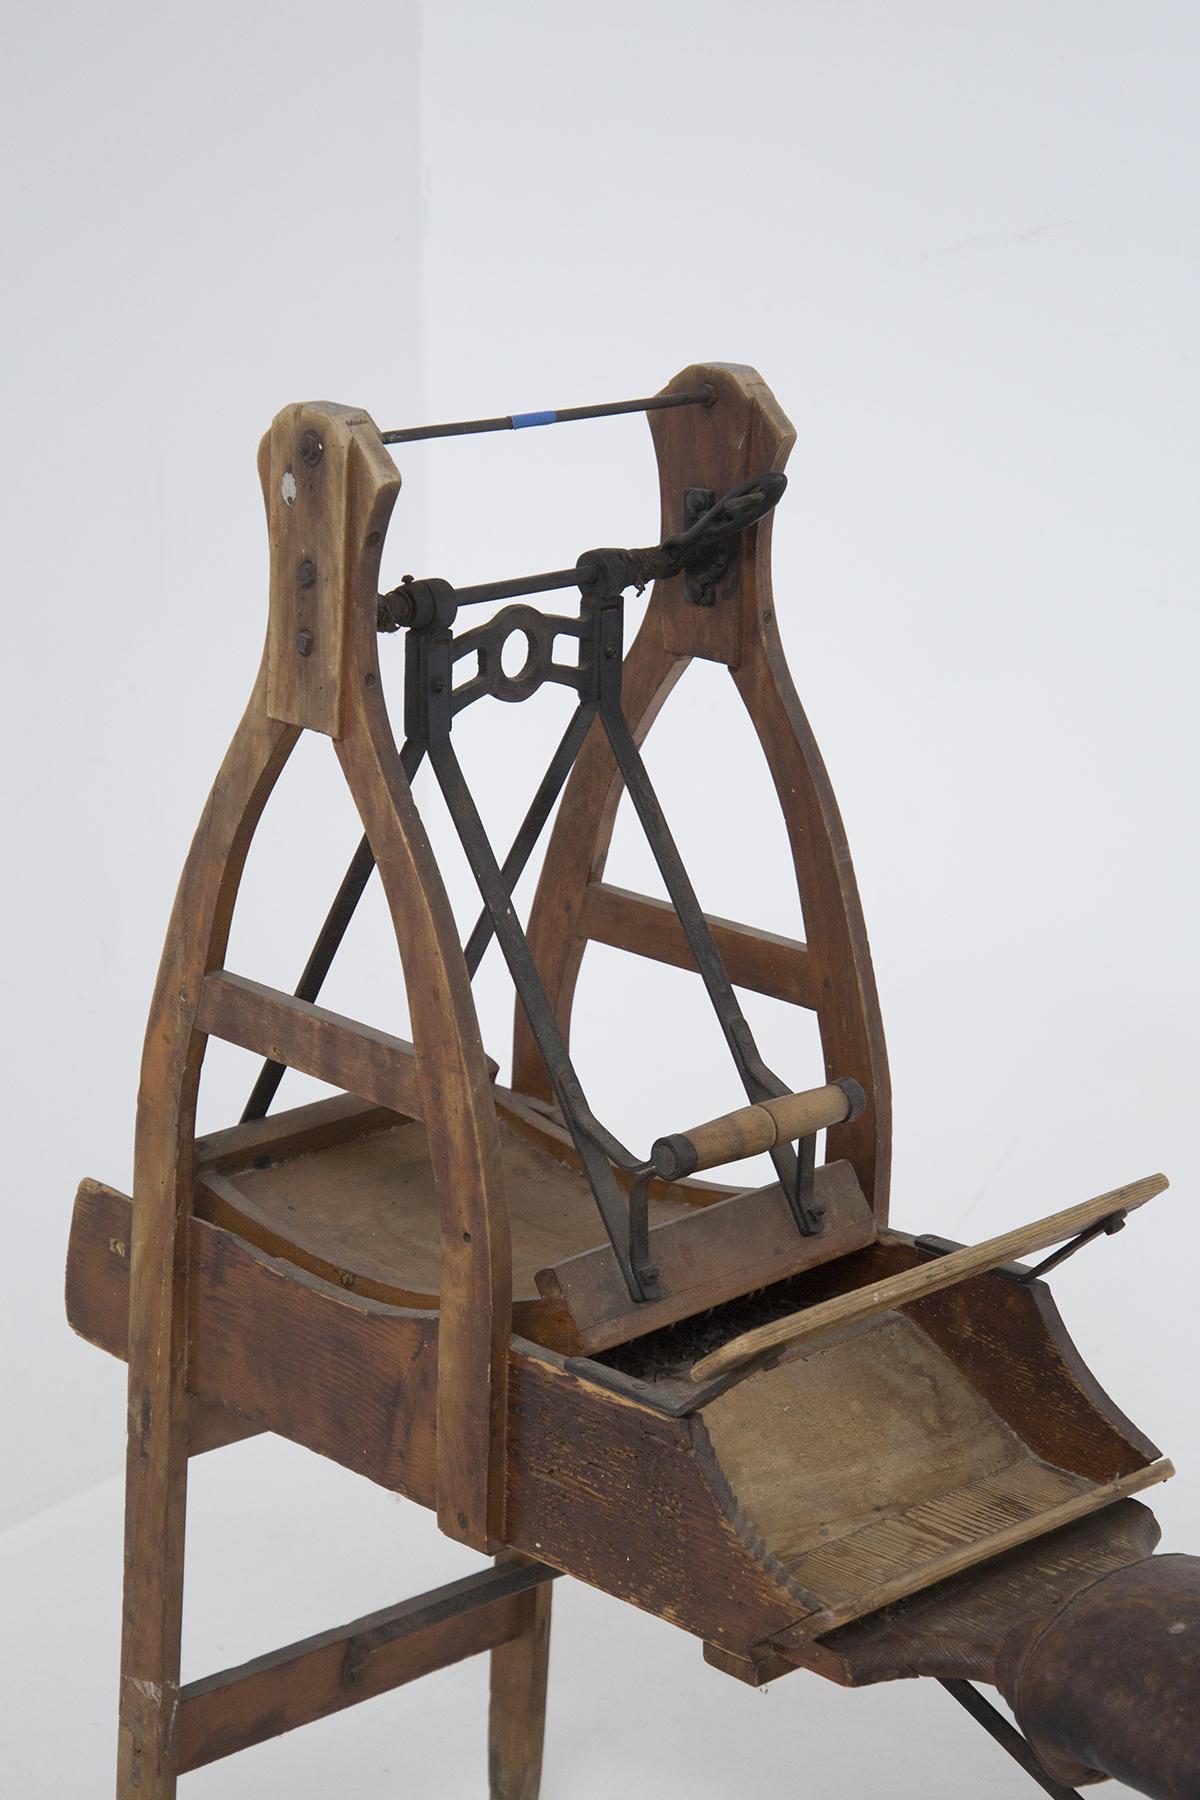 Antique machine to work wool made entirely of wood, from the beginning of 900, Italian manufacture.
The structure is typical of the machines of the past: there is a lower seat in the front, the seat is brown leather slightly worn. 
The supporting